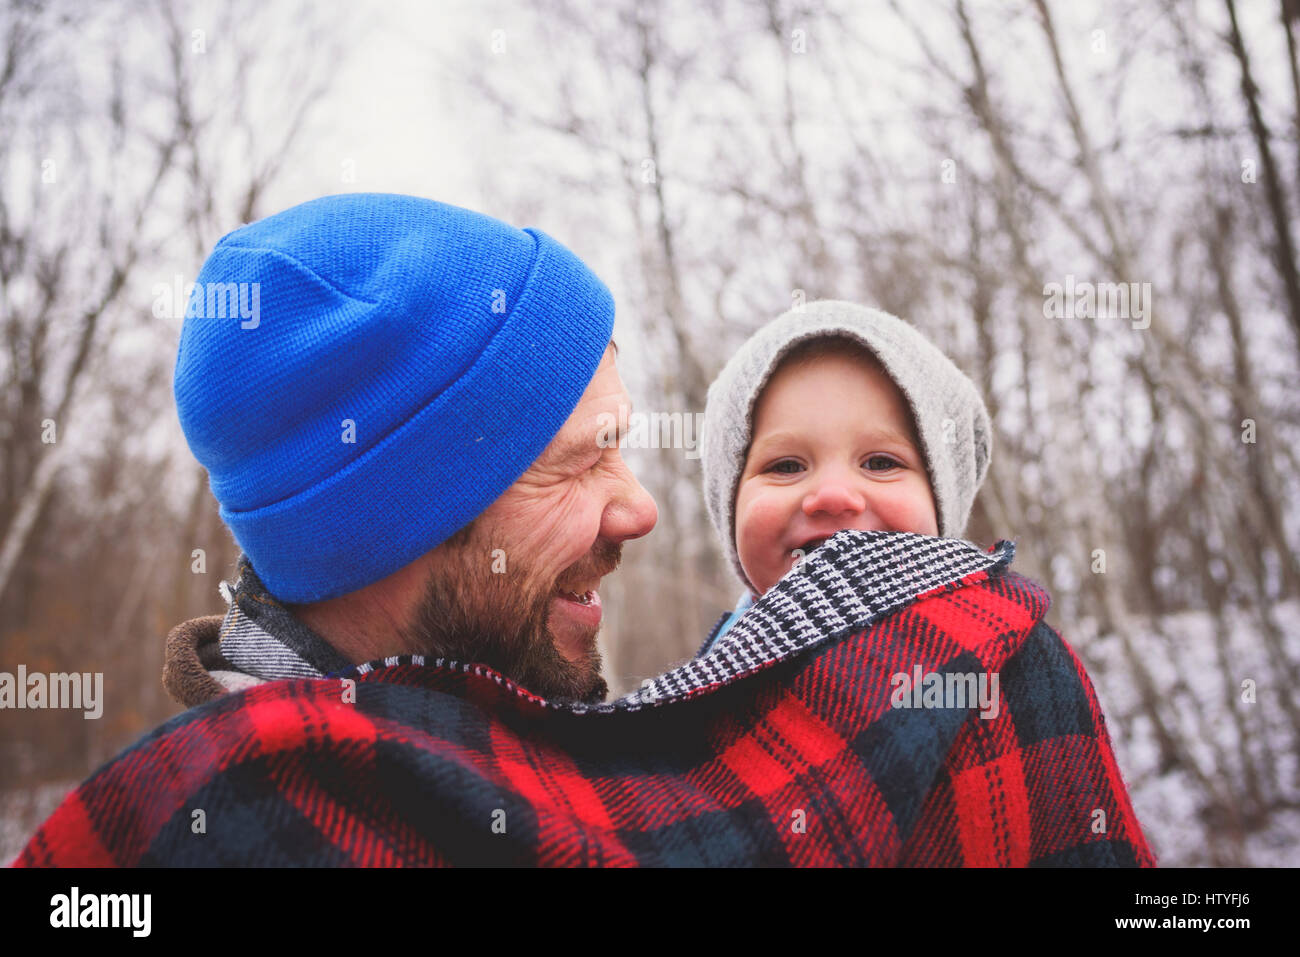 Portrait of a father carrying his baby son in a winter forest wrapped in a blanket Stock Photo